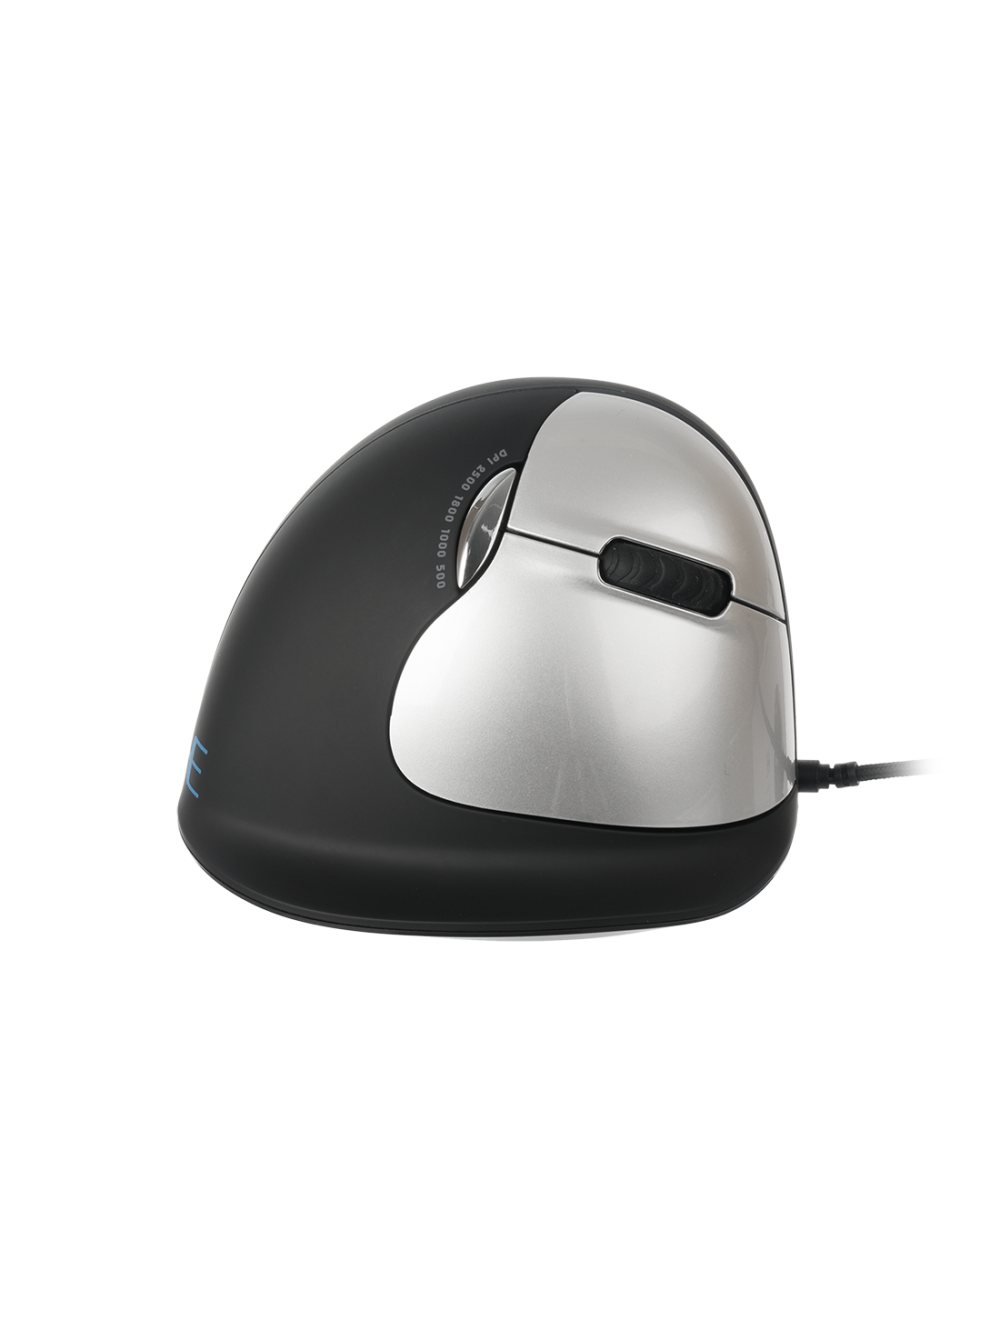 Vertical Ergonomic Mouse -  HE Vertical Mouse Right Large